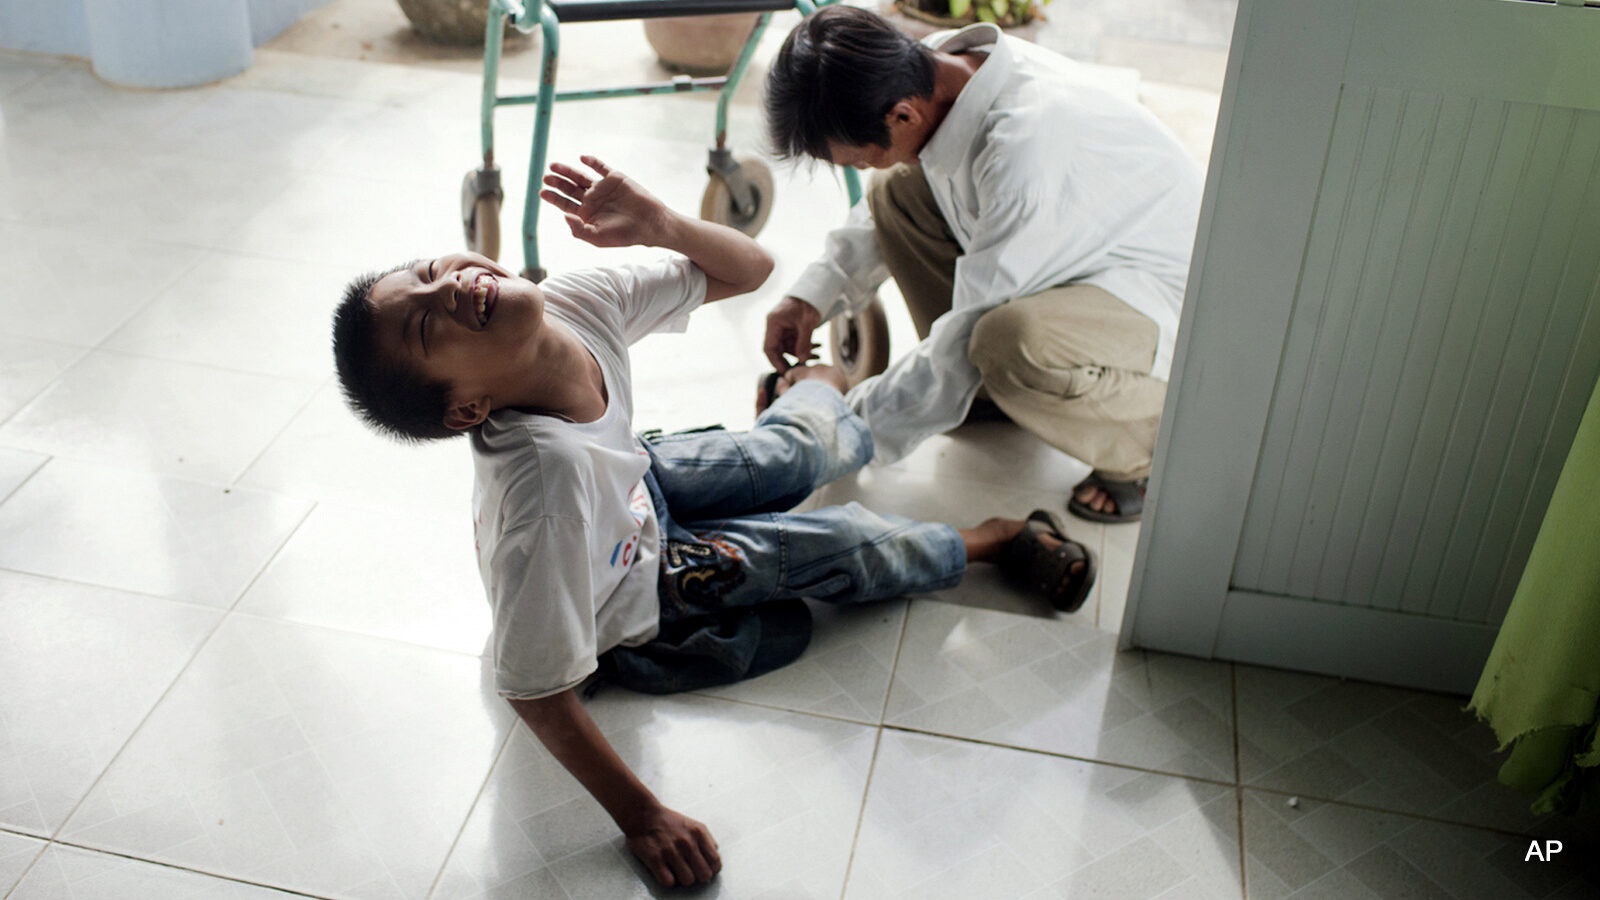 In this photo taken on Wednesday, Aug. 8, 2012, Le Van Tam, 14, is picked up by his father at a rehabilitation center in Danang, Vietnam. The children were born with physical and mental disabilities that the center's director says were caused by their parents' exposure to the chemical dioxin in the defoliant Agent Orange. On Thursday, the U.S. for the first time will begin cleaning up leftover dioxin that was stored at the former military base that's now part of Danang's airport. (AP Photo/Maika Elan)